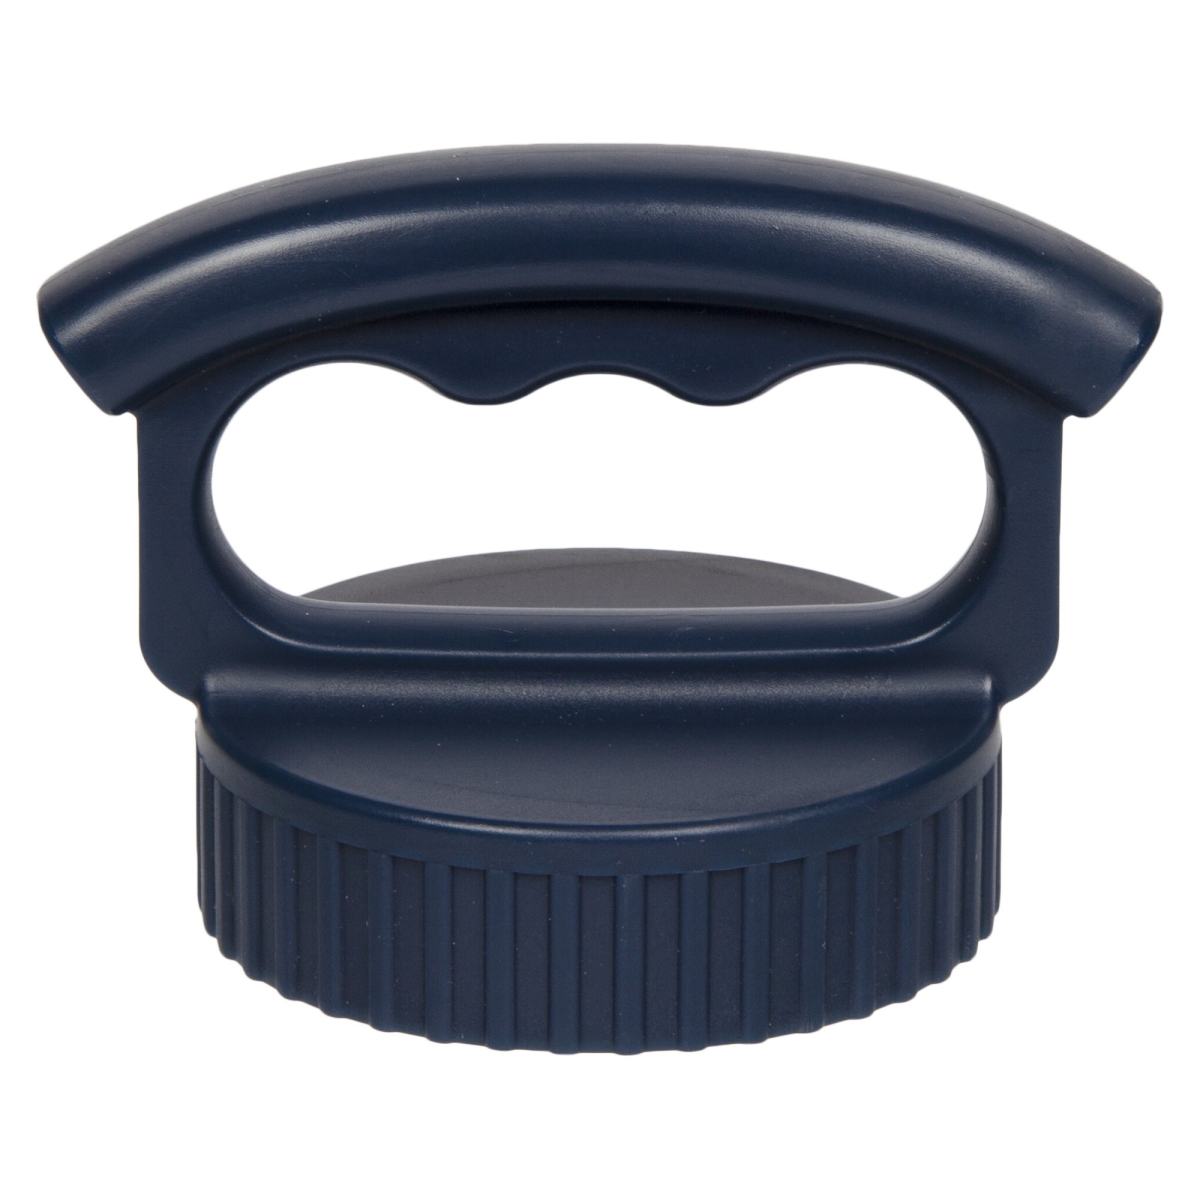 A45003nb0 Fifty & Fifty 3 Finger Caps, Navy Blue